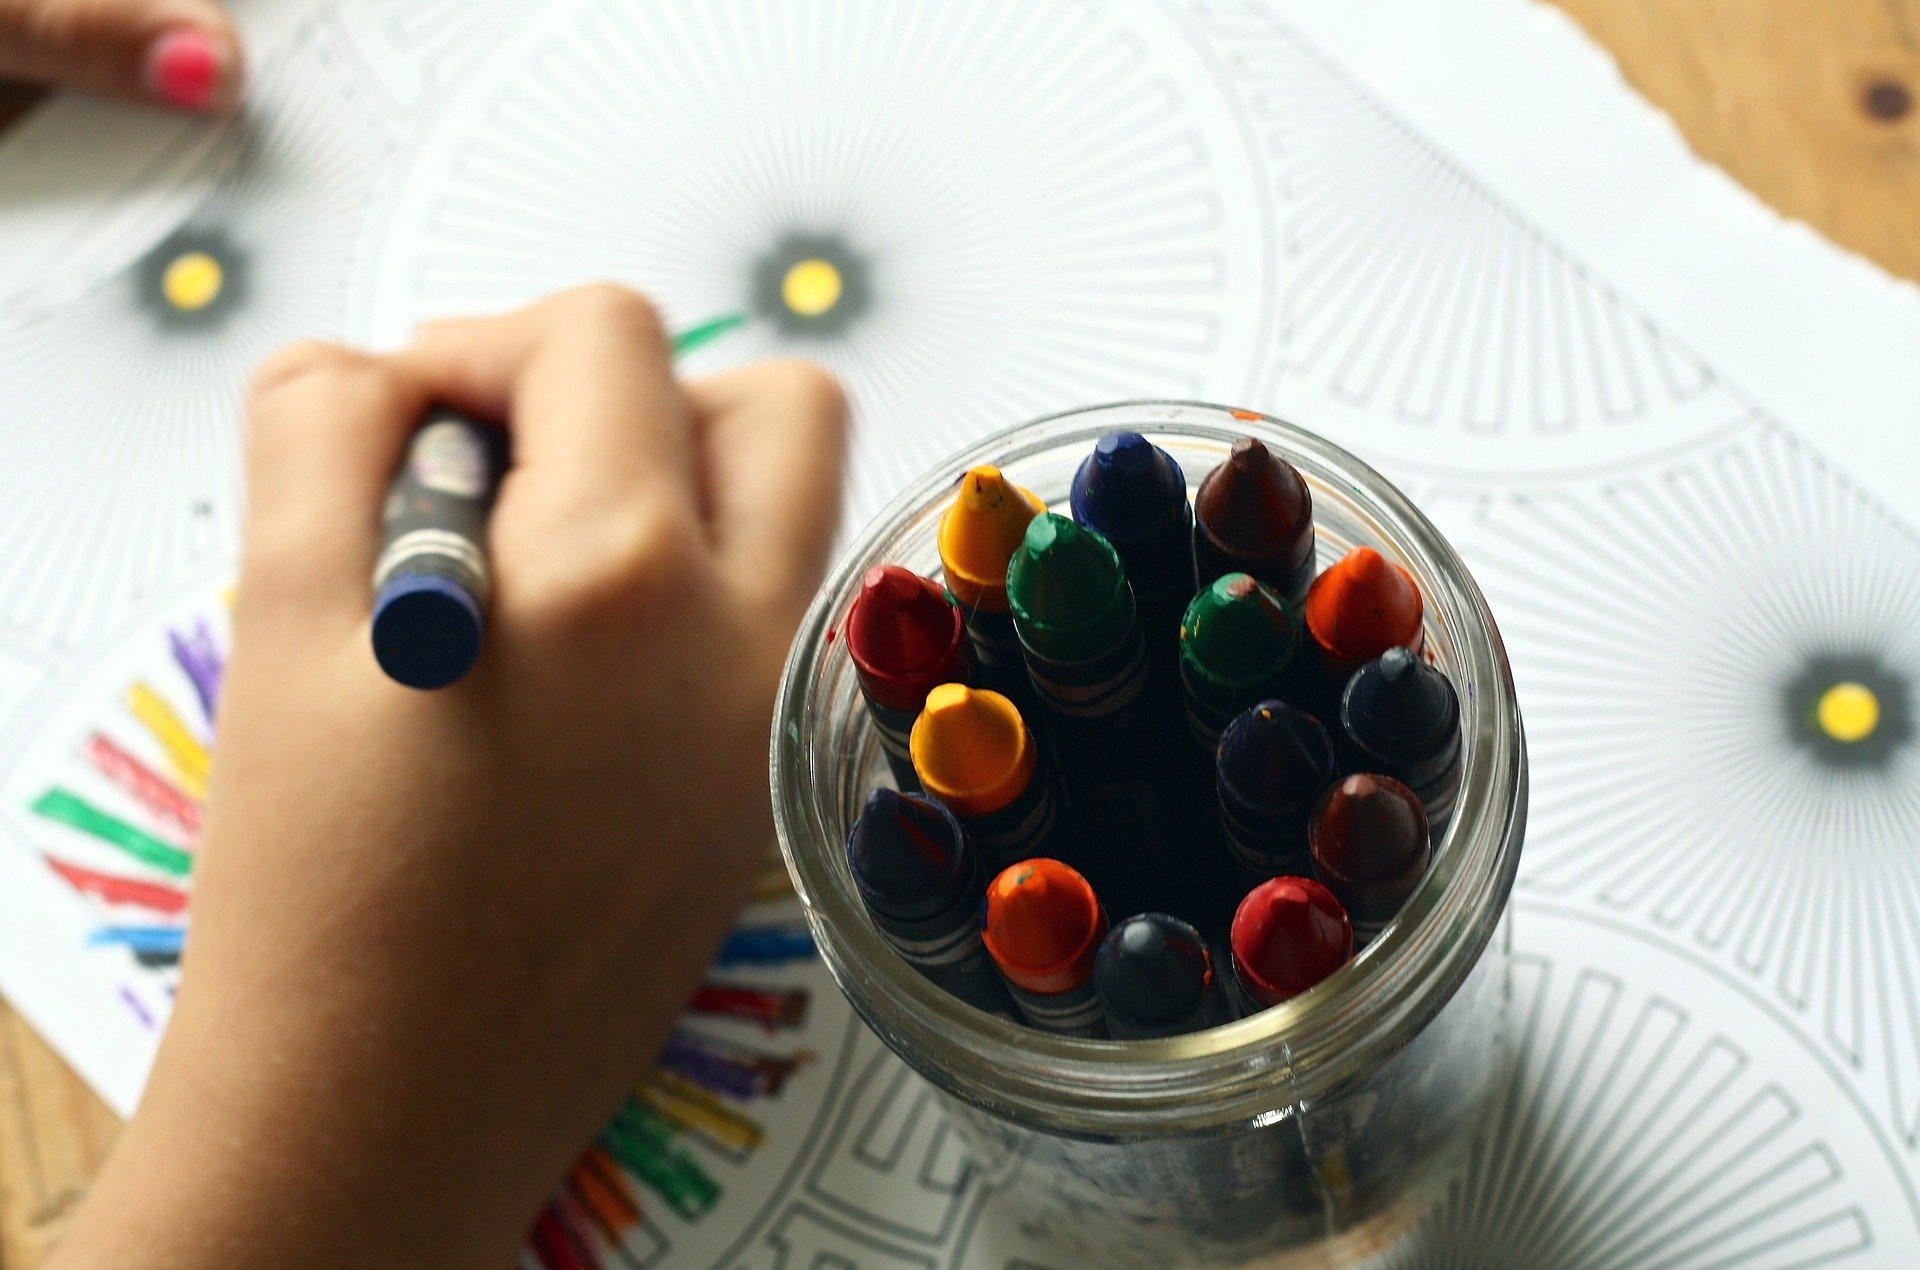 A child's hand holding a crayon over a coloring book with a glass jar full of colorful crayons on a wooden table at daycare, highlighting a creative activity setup focused on fostering artistic expression while ensuring